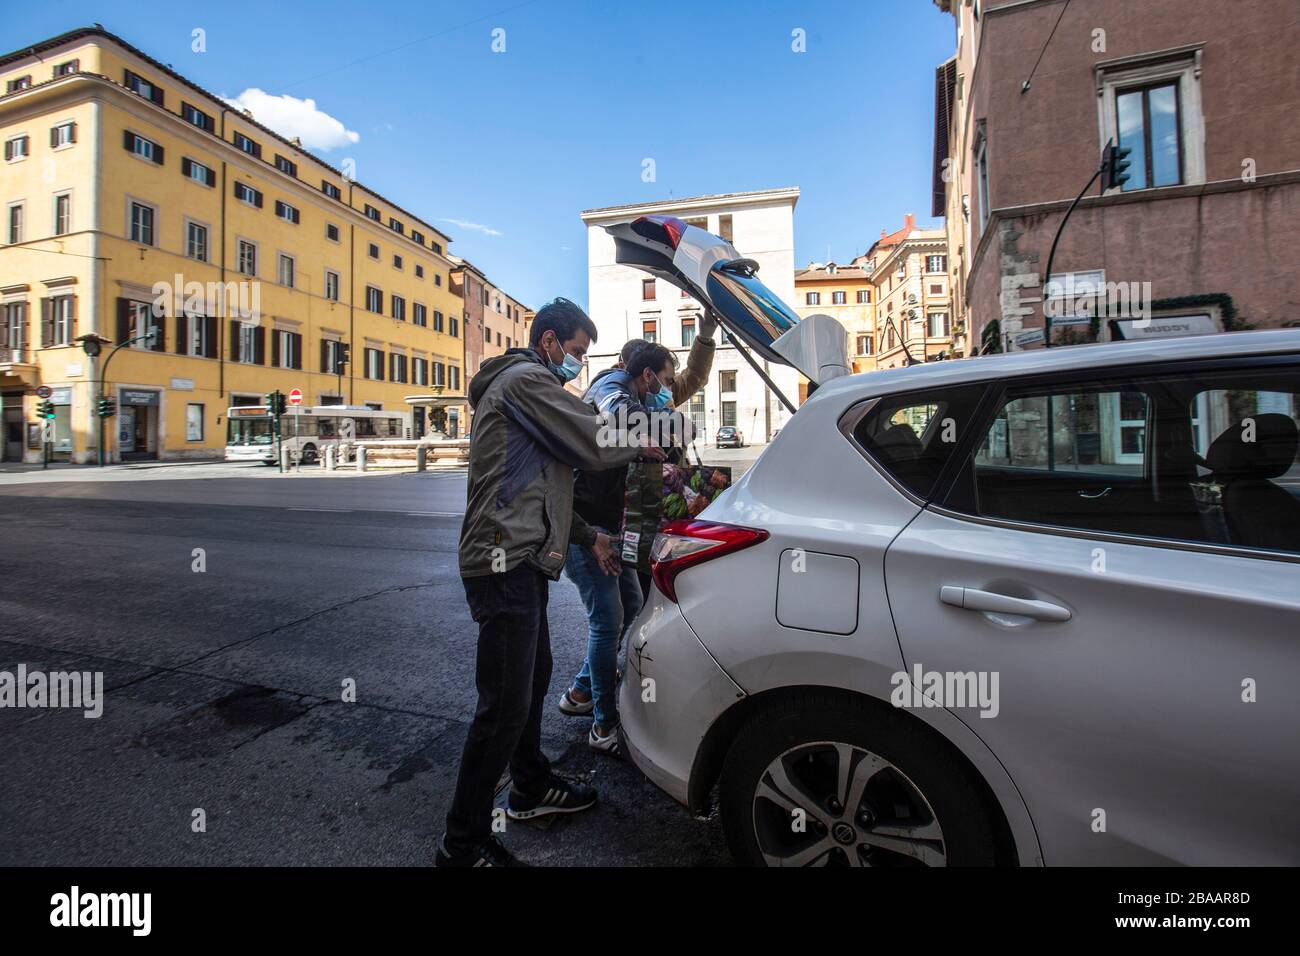 Rome March 25th 2020 Rome during the Coronavirus pandemic. customers take a taxi wears protettive masks in Corso Vittorio Emanuele  Photo by Elio Castoria Stock Photo